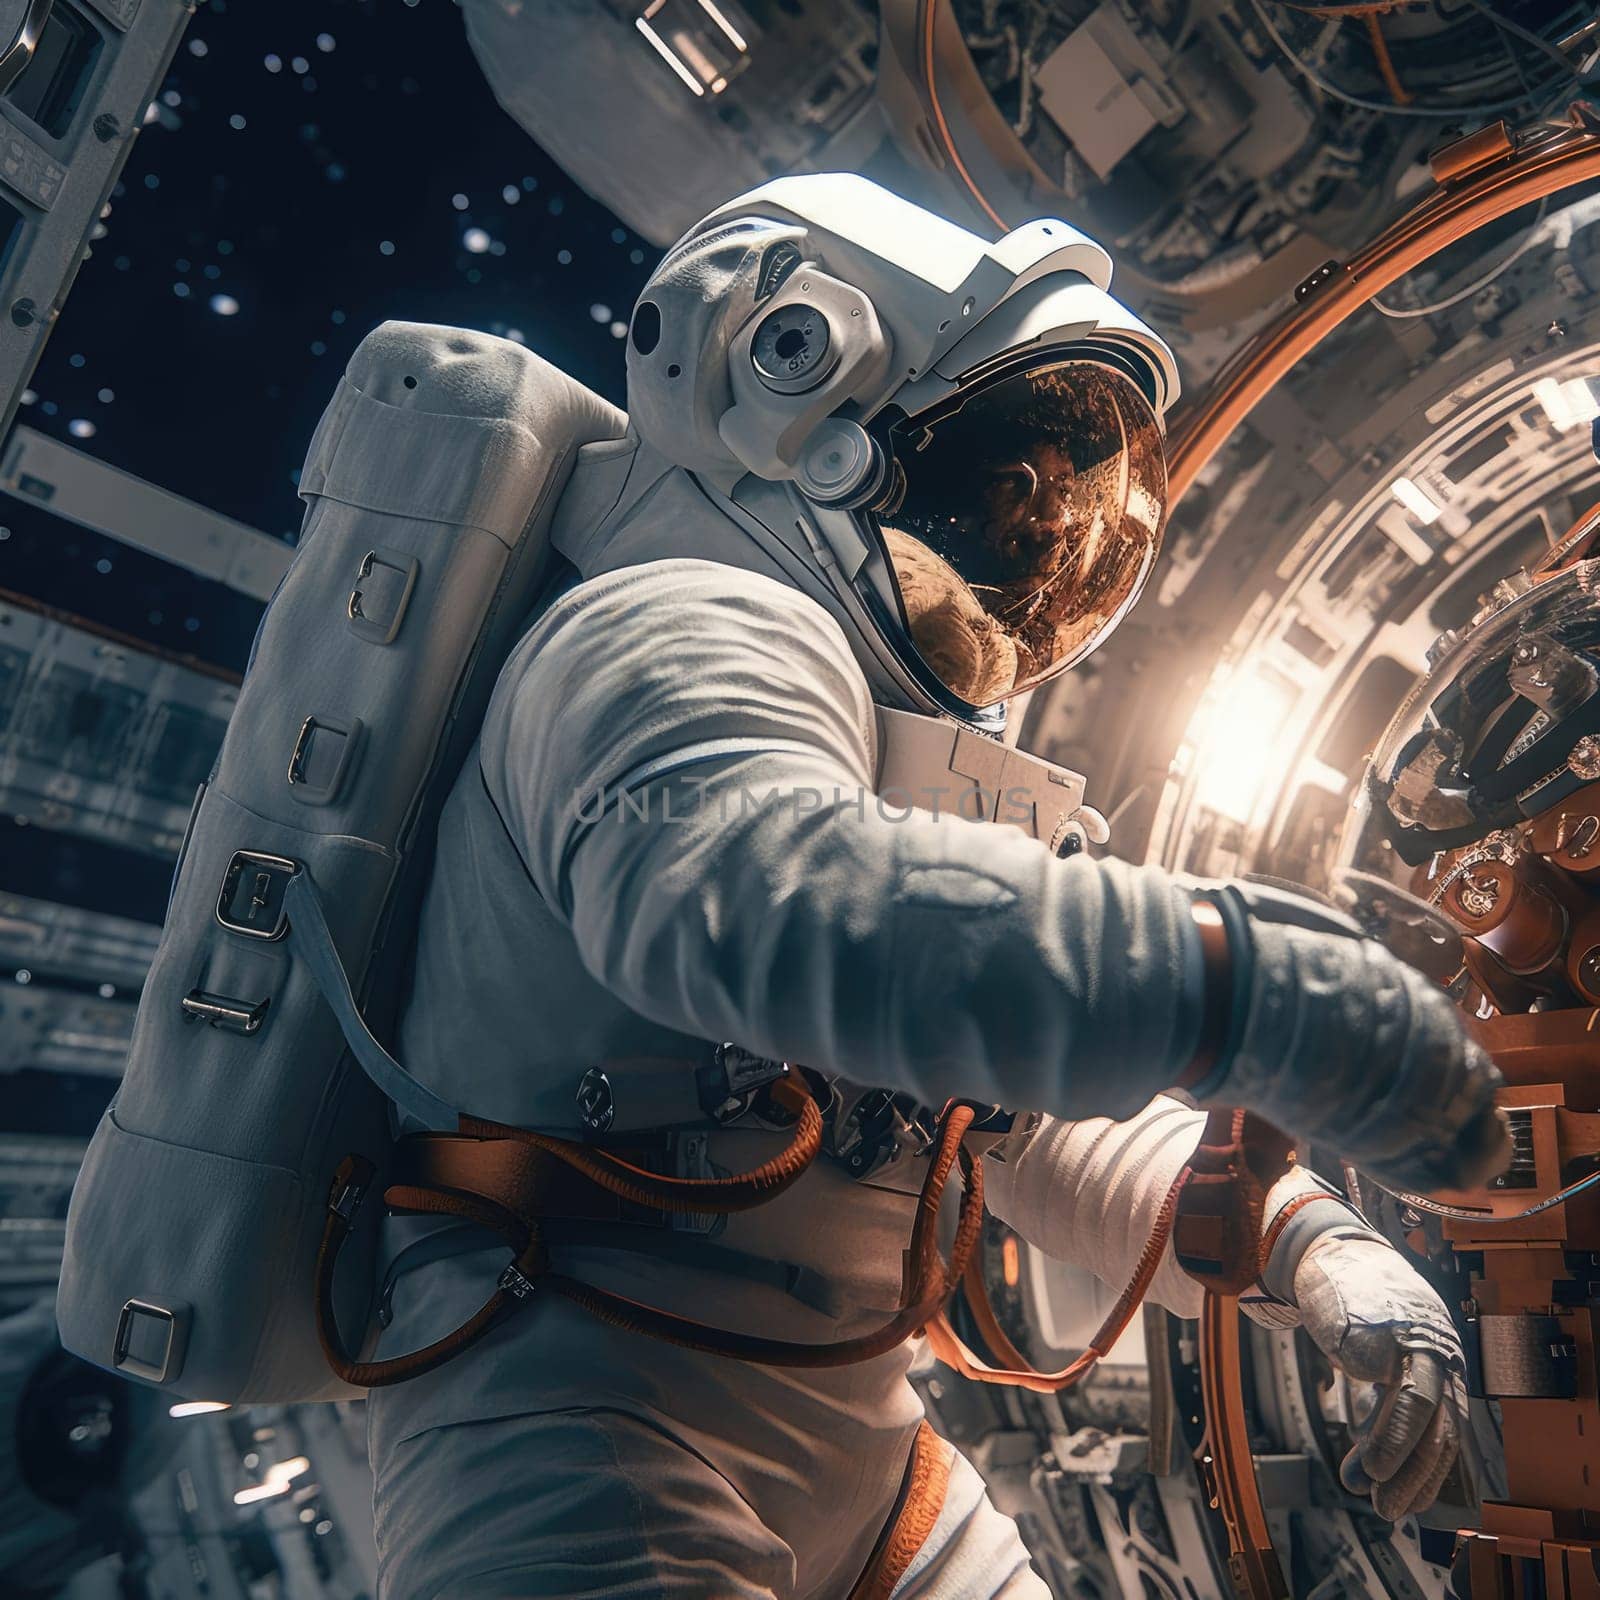 An astronaut in a spacesuit repairs a space station in outer space